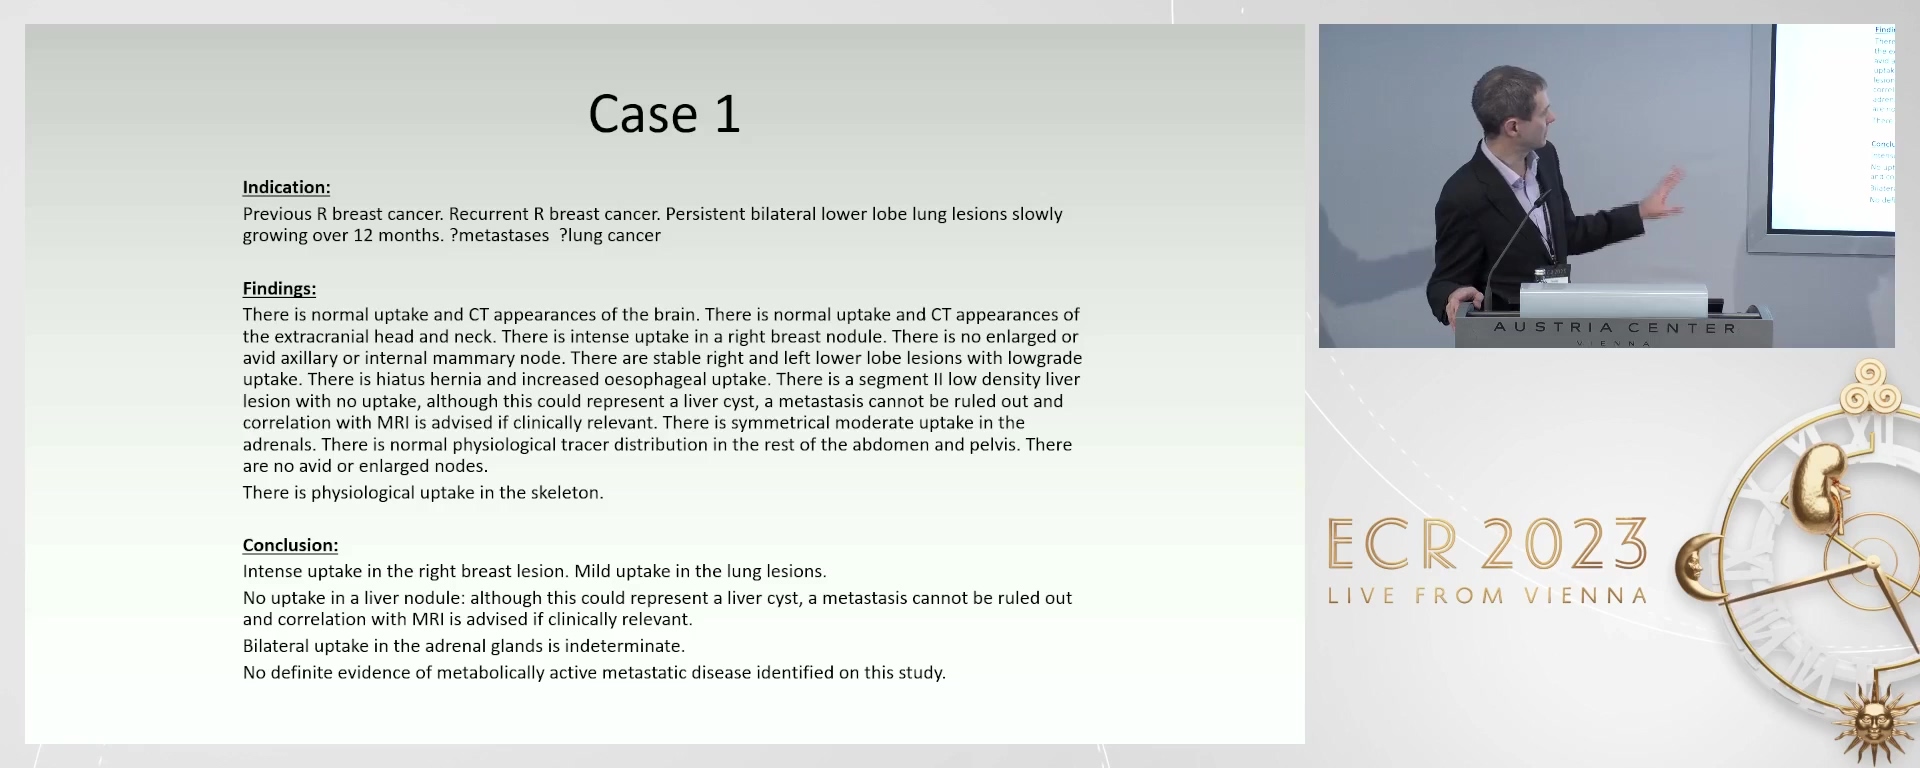 Short cases review, interactive discussion and critiquing of reports